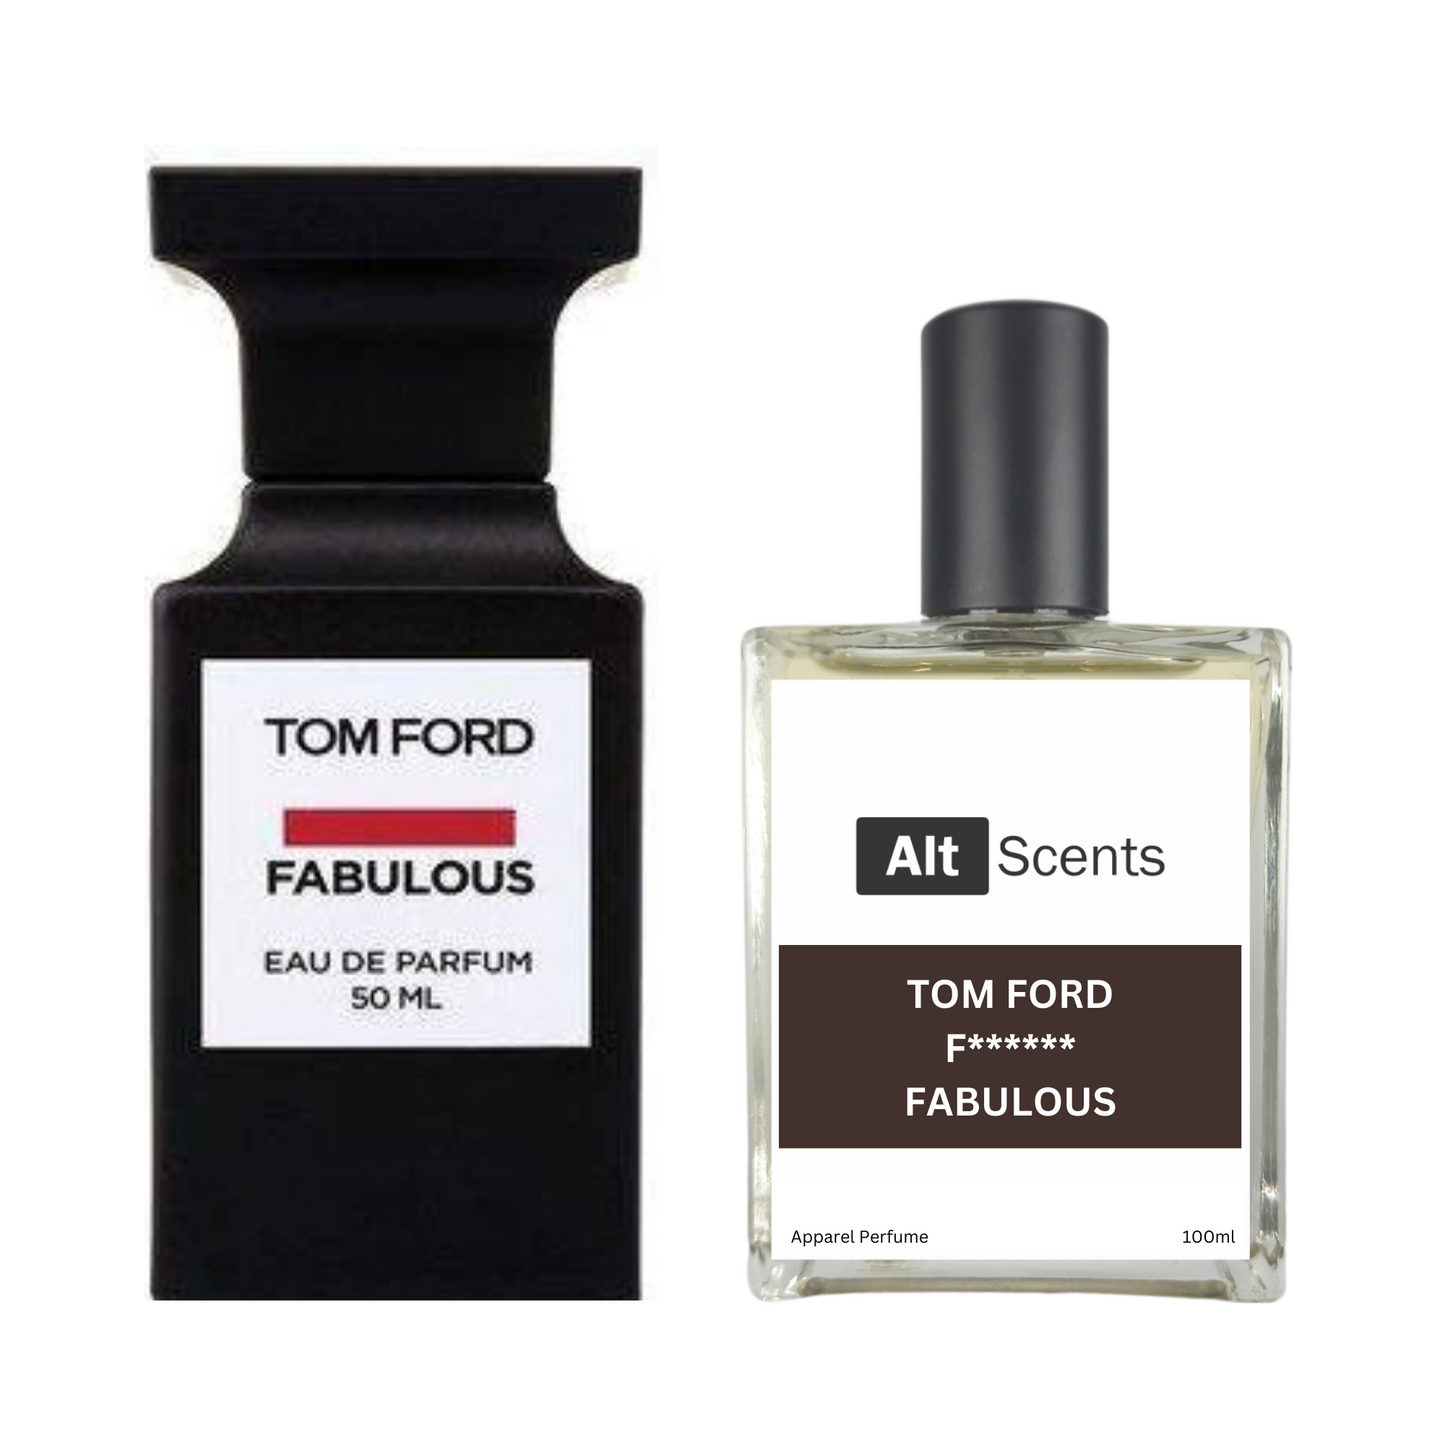 Tom Ford F**** Fabulous type Perfume for Unisex